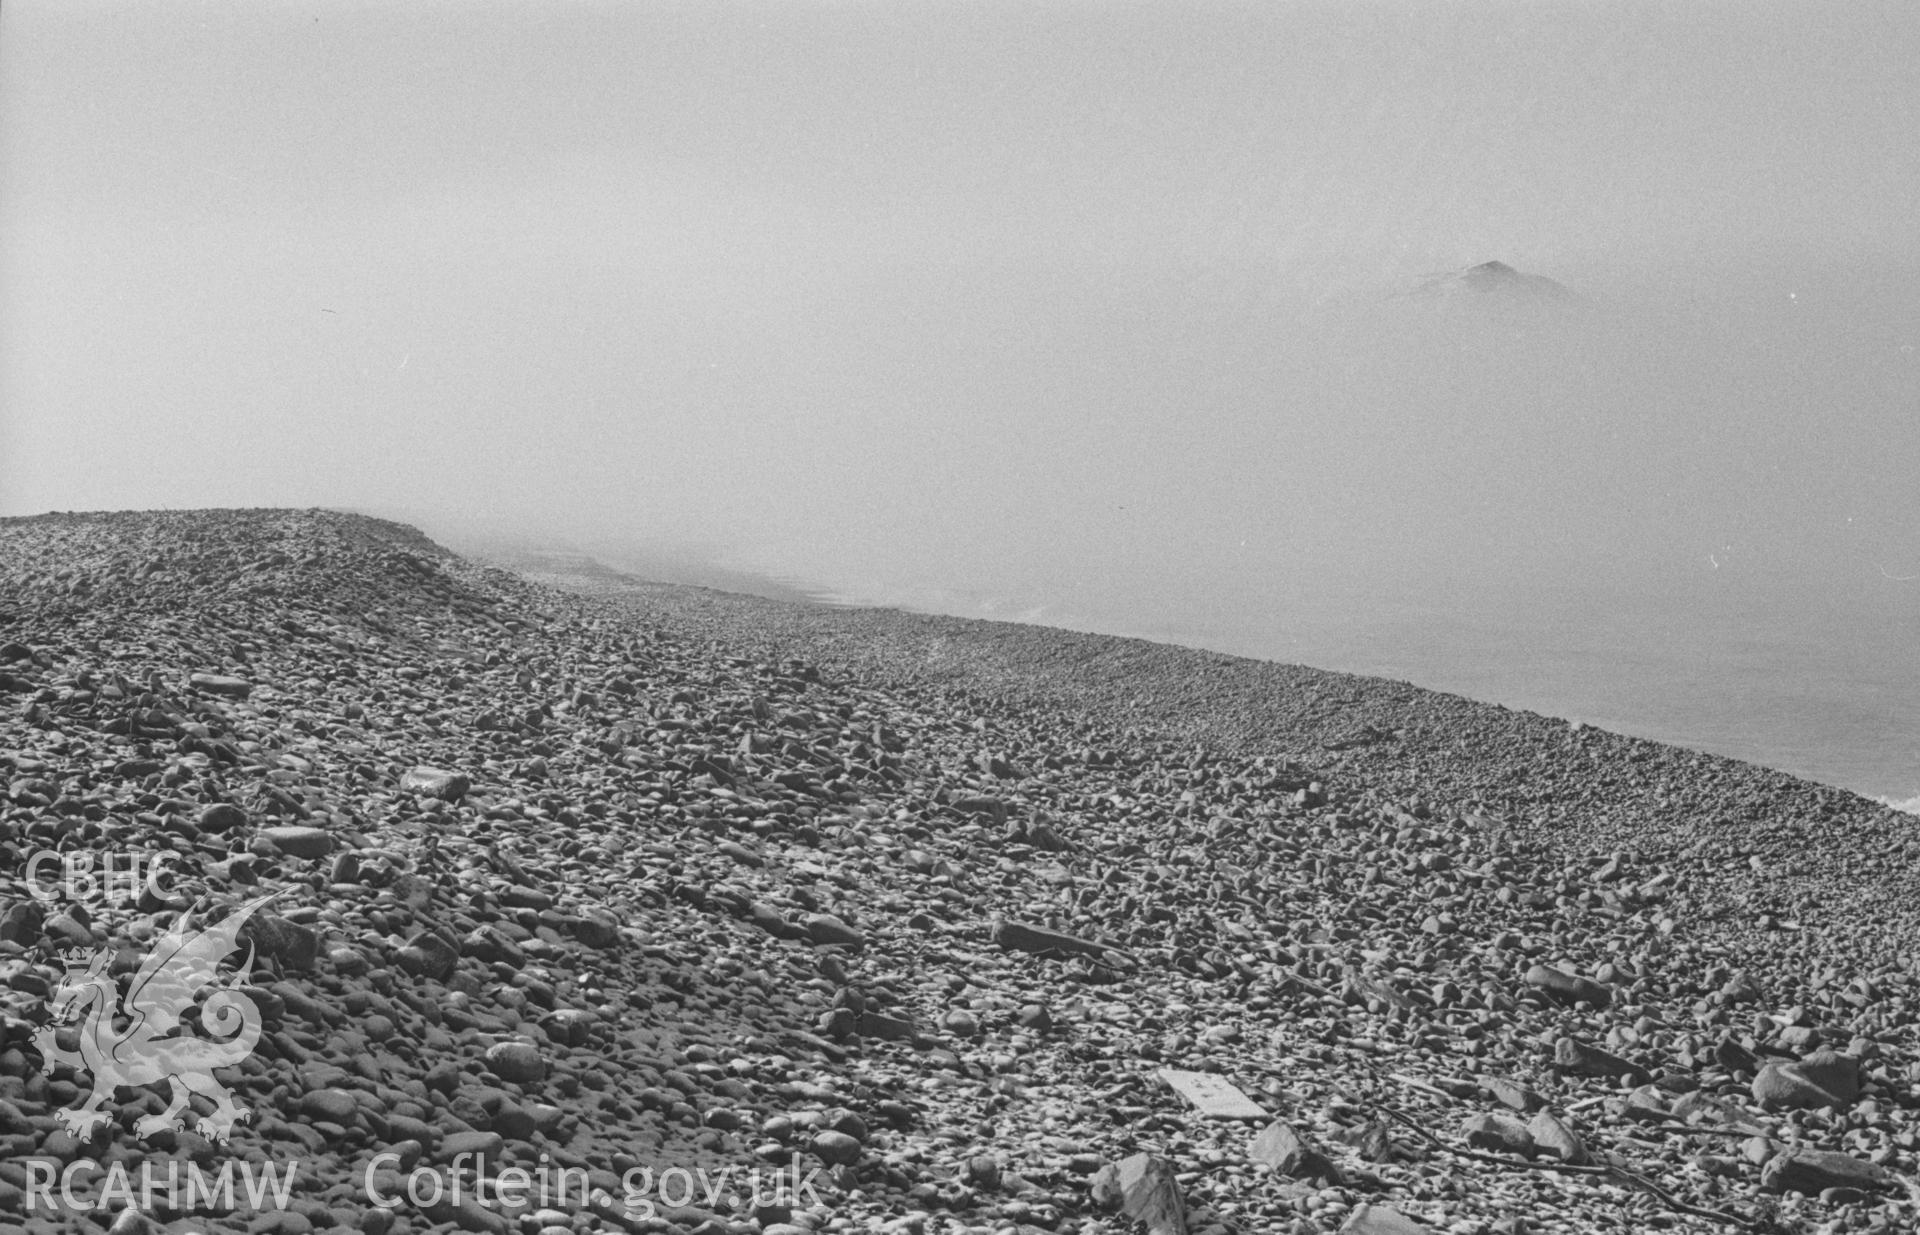 Digital copy of a black and white negative showing Allt-Wen and Tanybwlch beach, Aberystwyth, in snow and sea mist. Photographed by Arthur O. Chater in April 1968. (Looking south south west from the stone pier, Grid Reference SN 579 807).